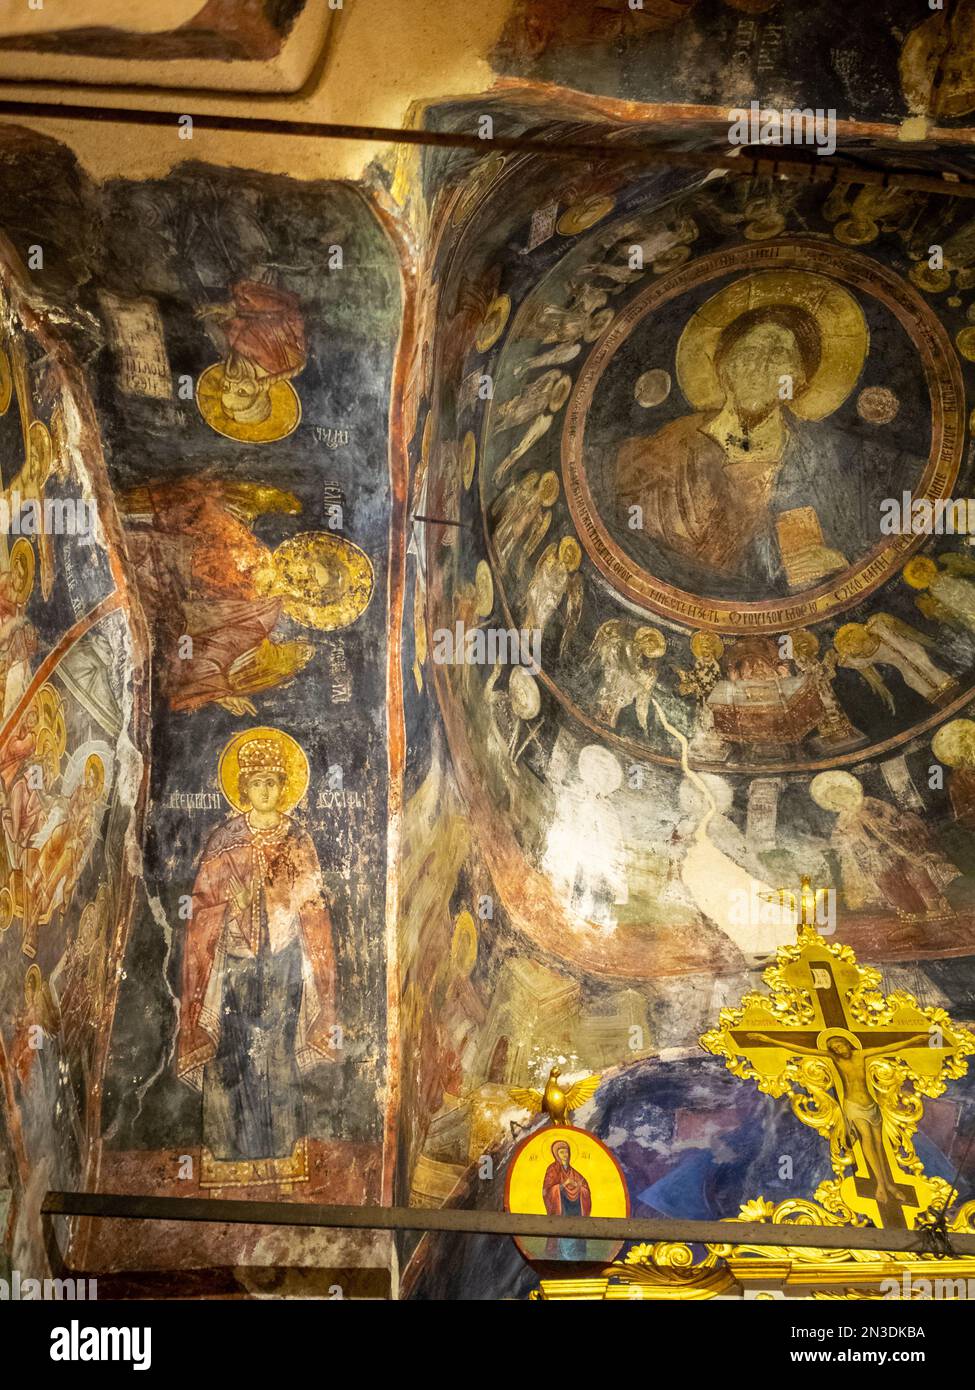 Ceilling frescos of the Church of St George in Podgorica Stock Photo